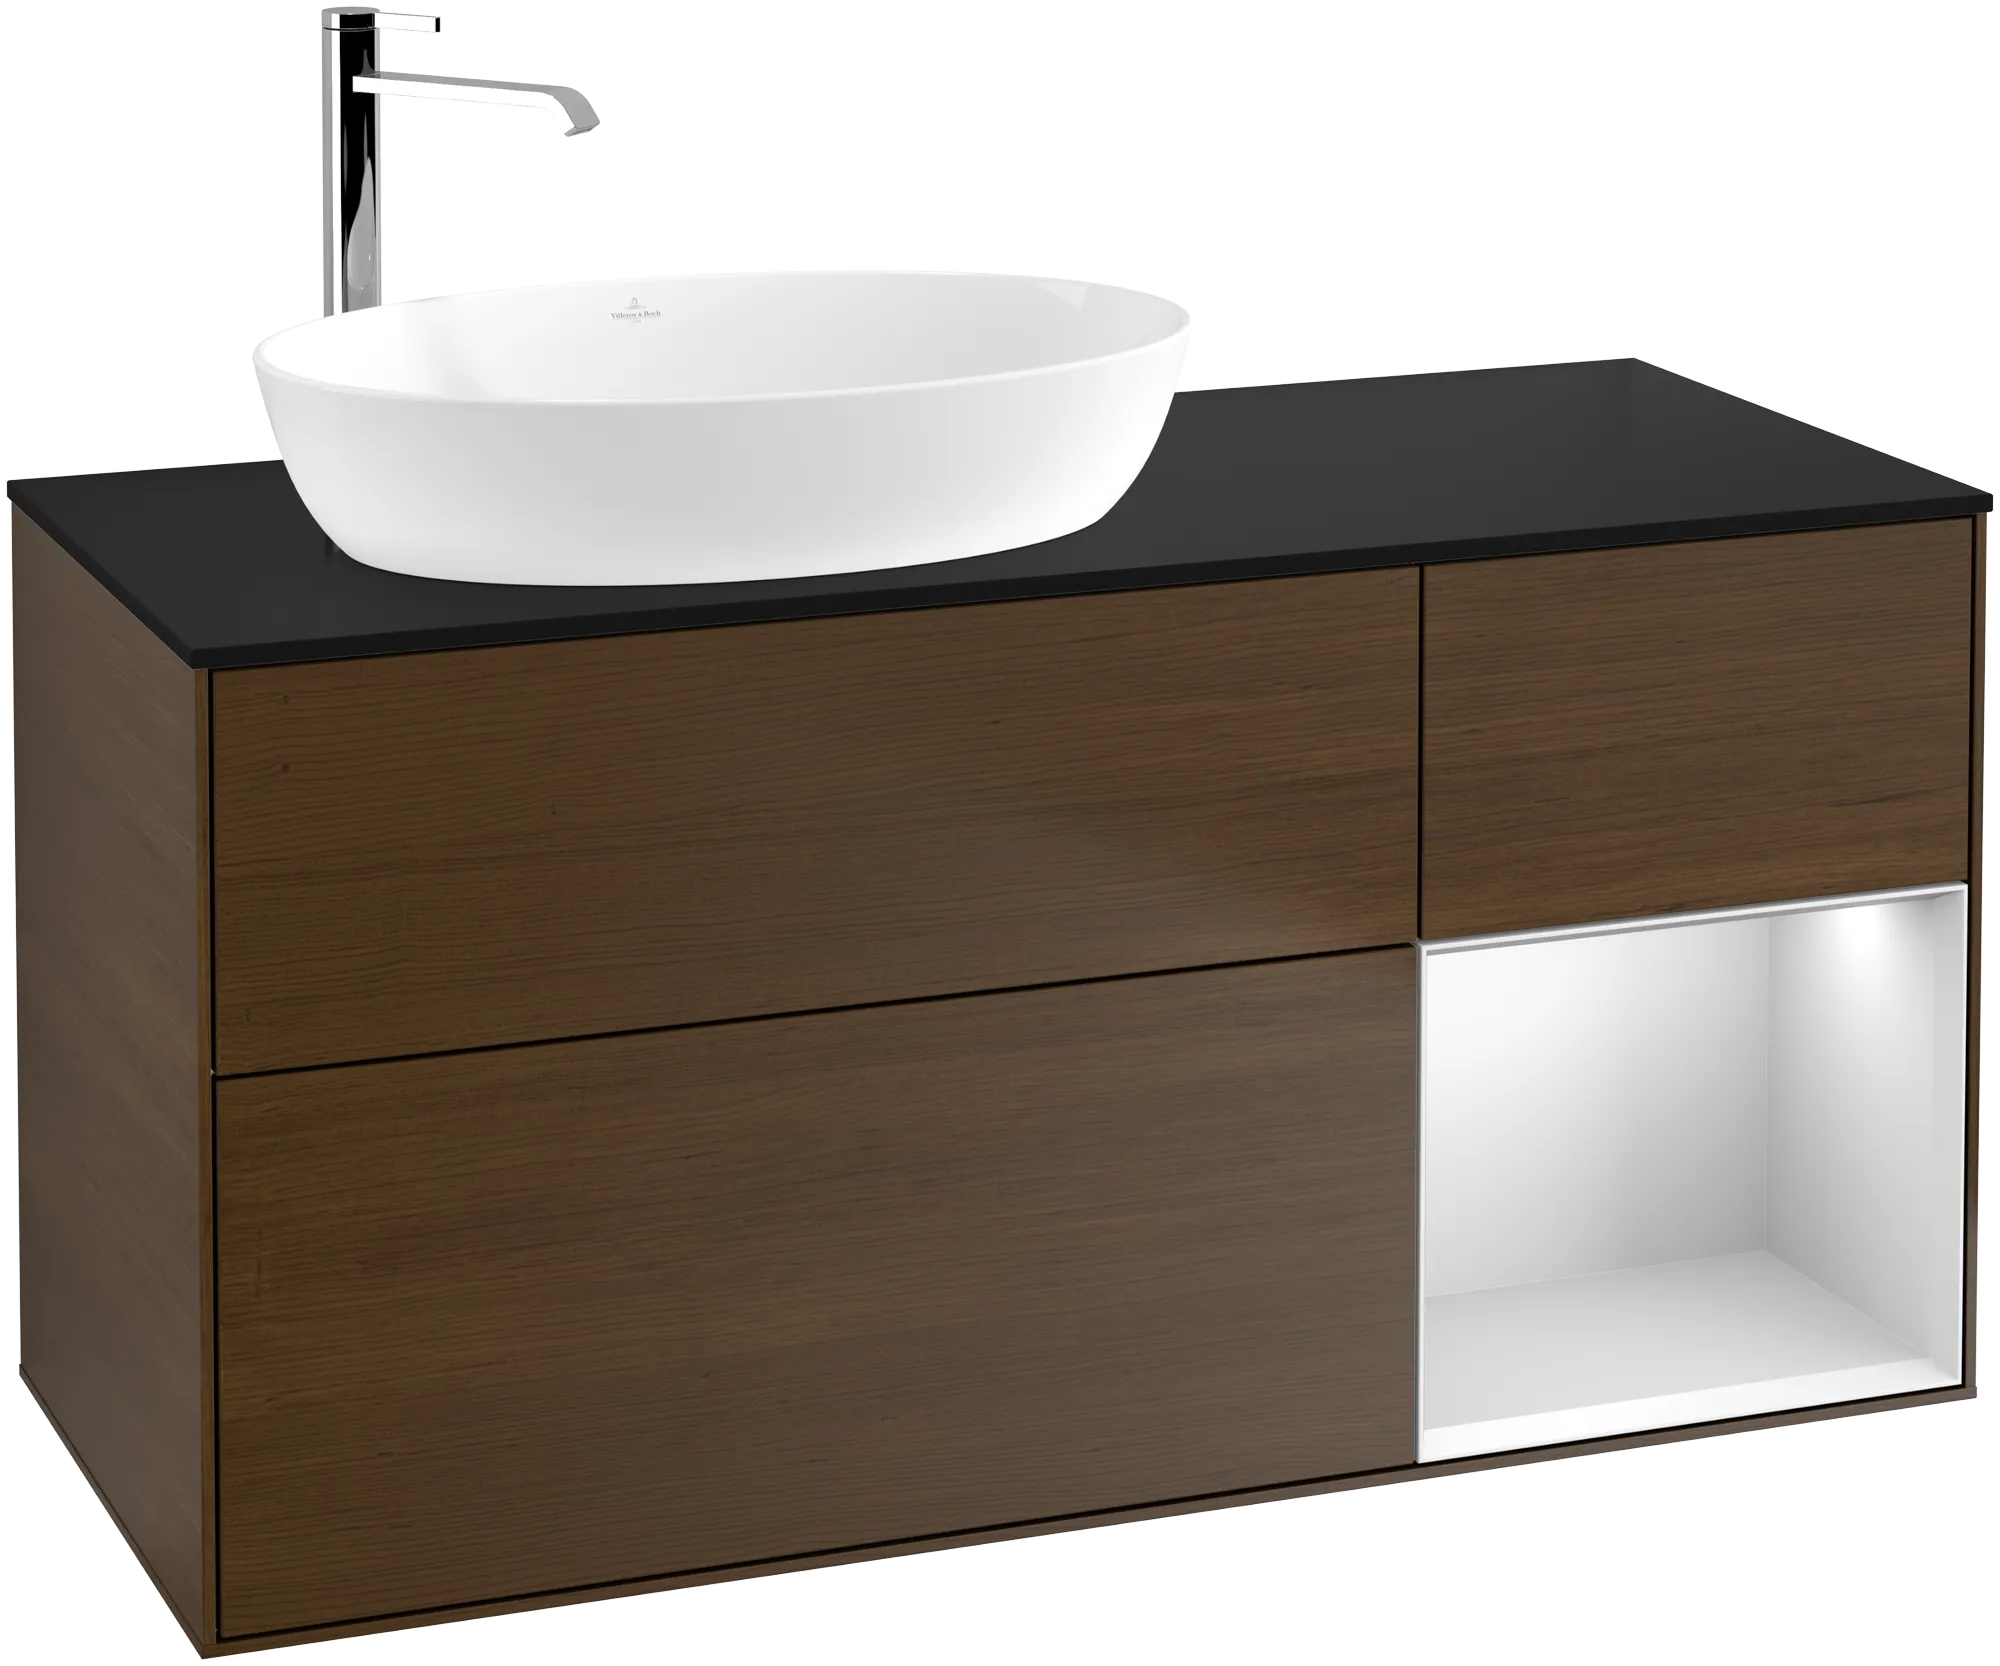 Picture of VILLEROY BOCH Finion Vanity unit, with lighting, 3 pull-out compartments, 1200 x 603 x 501 mm, Walnut Veneer / White Matt Lacquer / Glass Black Matt #G932MTGN